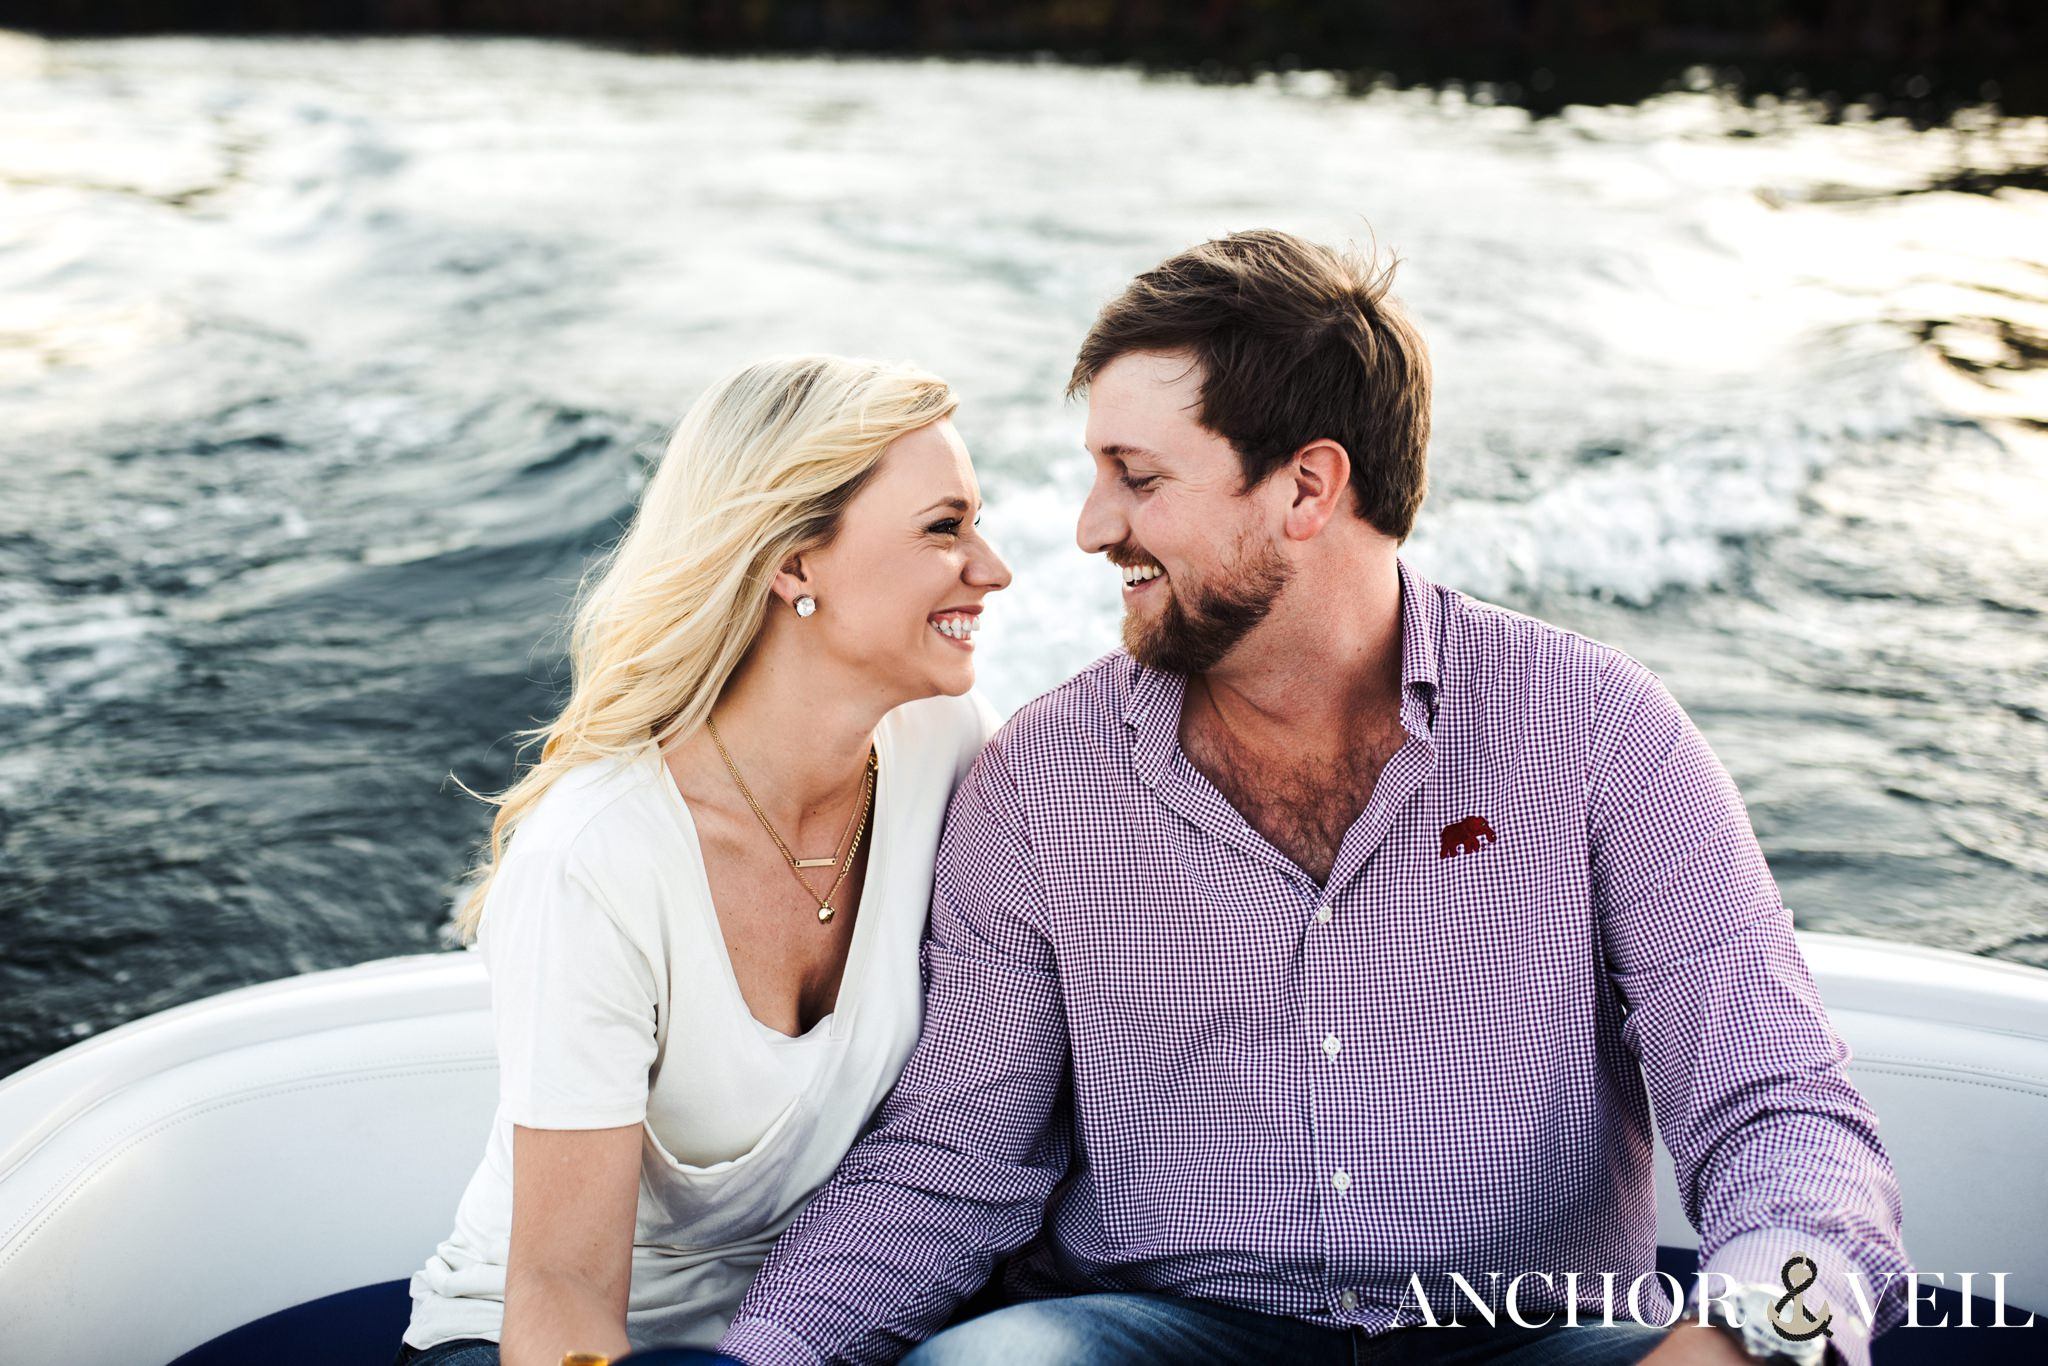 driving the boat as they laugh during the belews lake engagement session